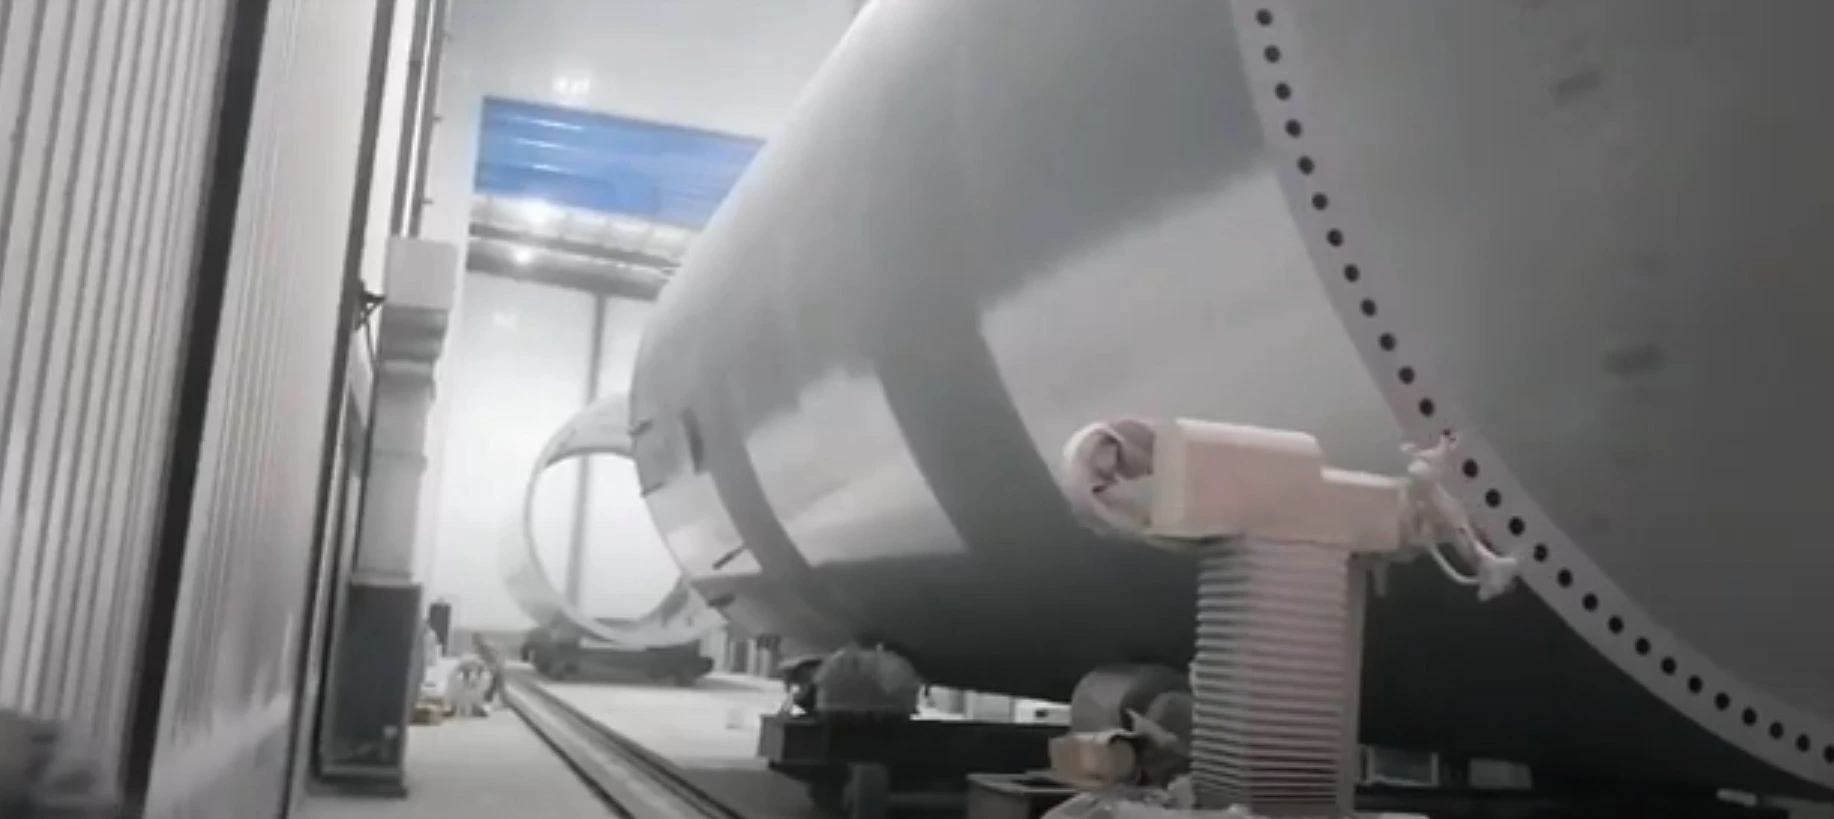 Working Video of Wind Tower Auto Spraying Robot